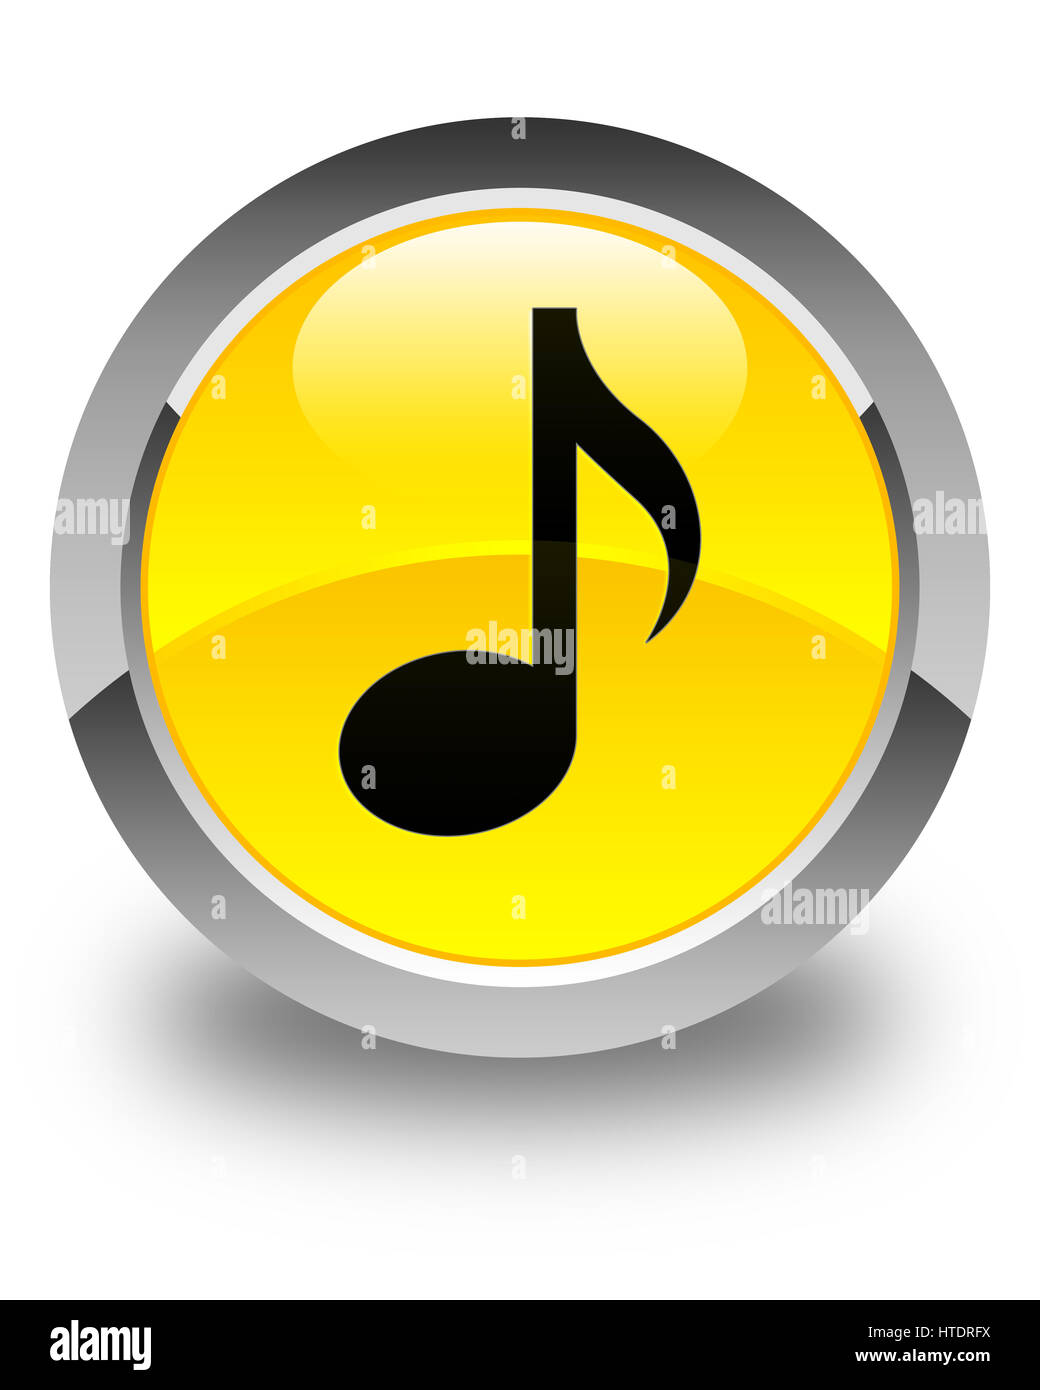 Music Luxurious Glossy Yellow Round Button Abstract Stock